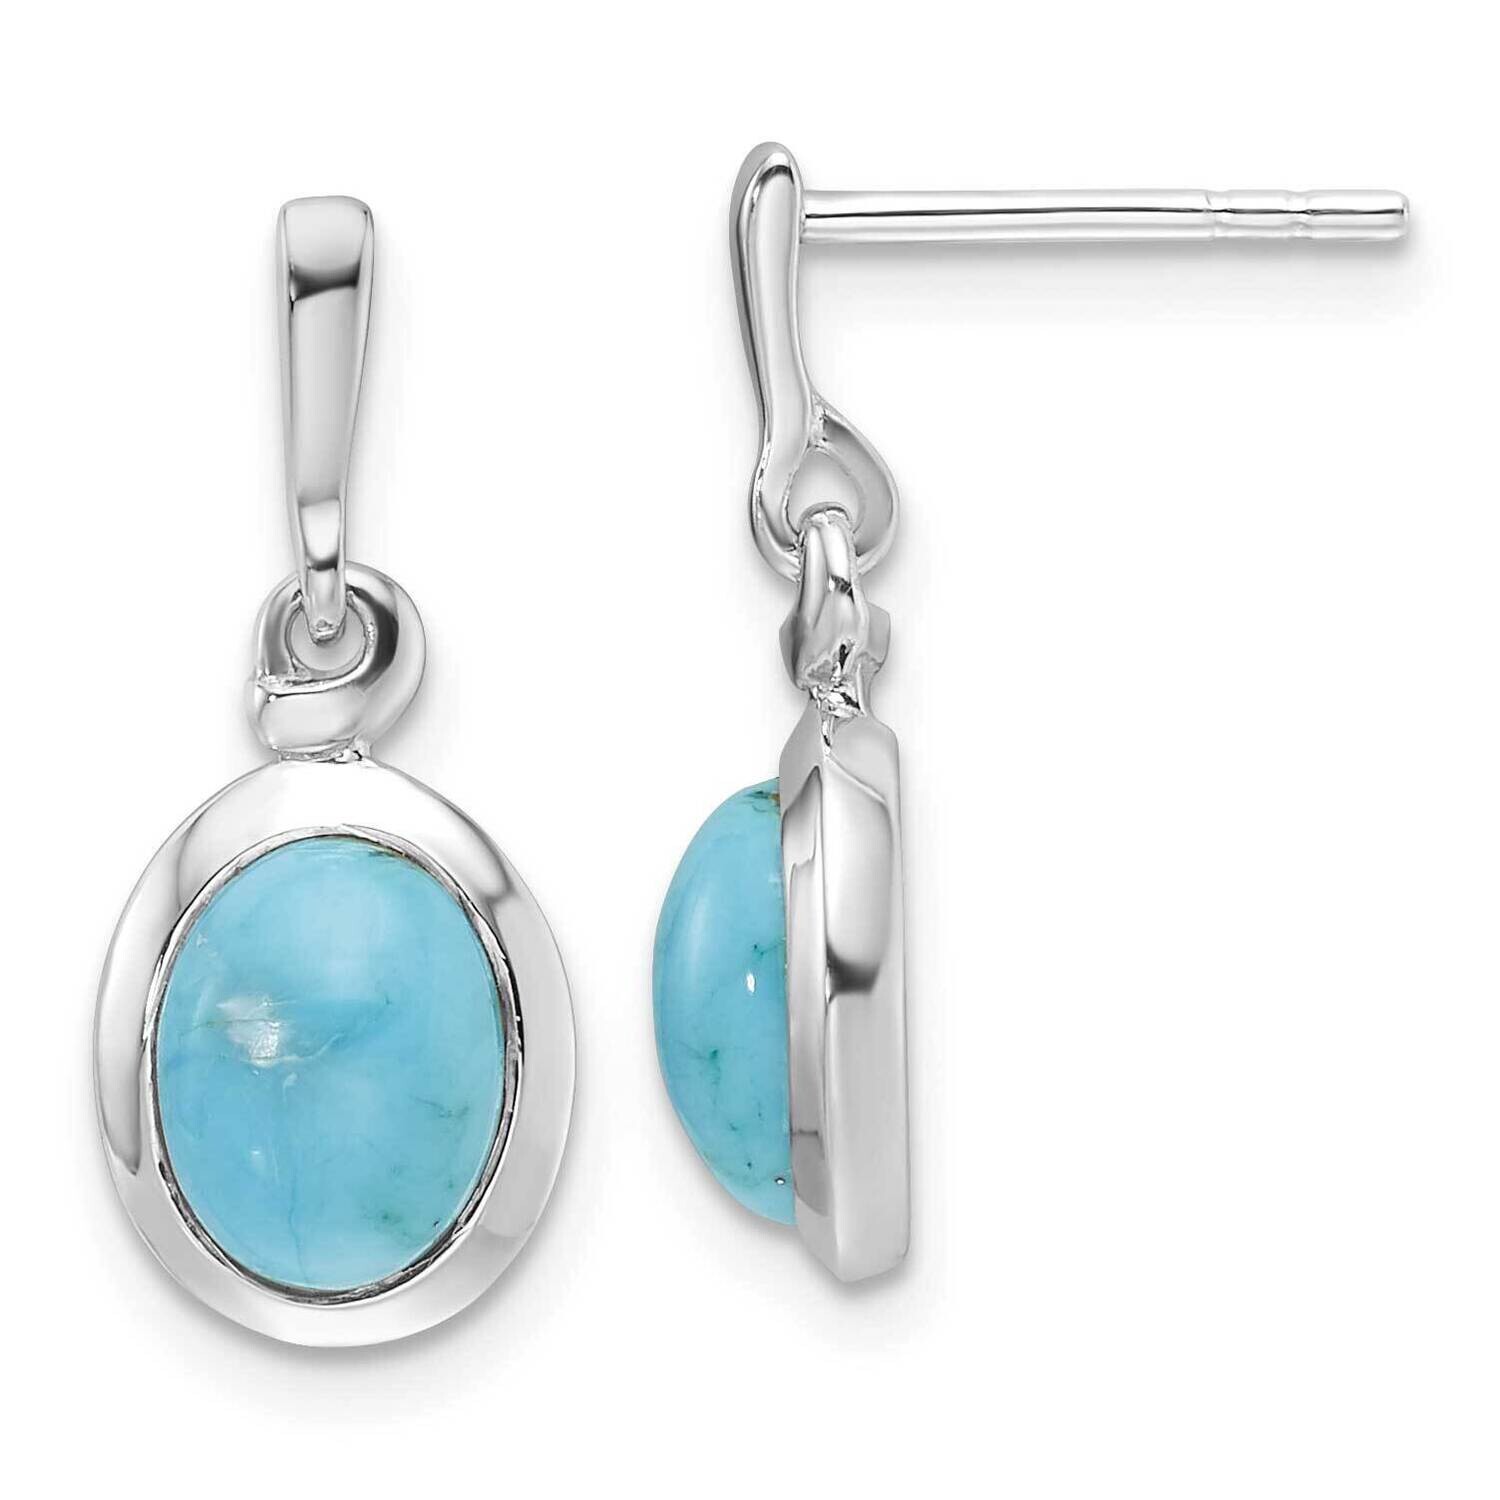 Rh-Plated Oval Turquoise Drop Post Earrings Sterling Silver QE16768